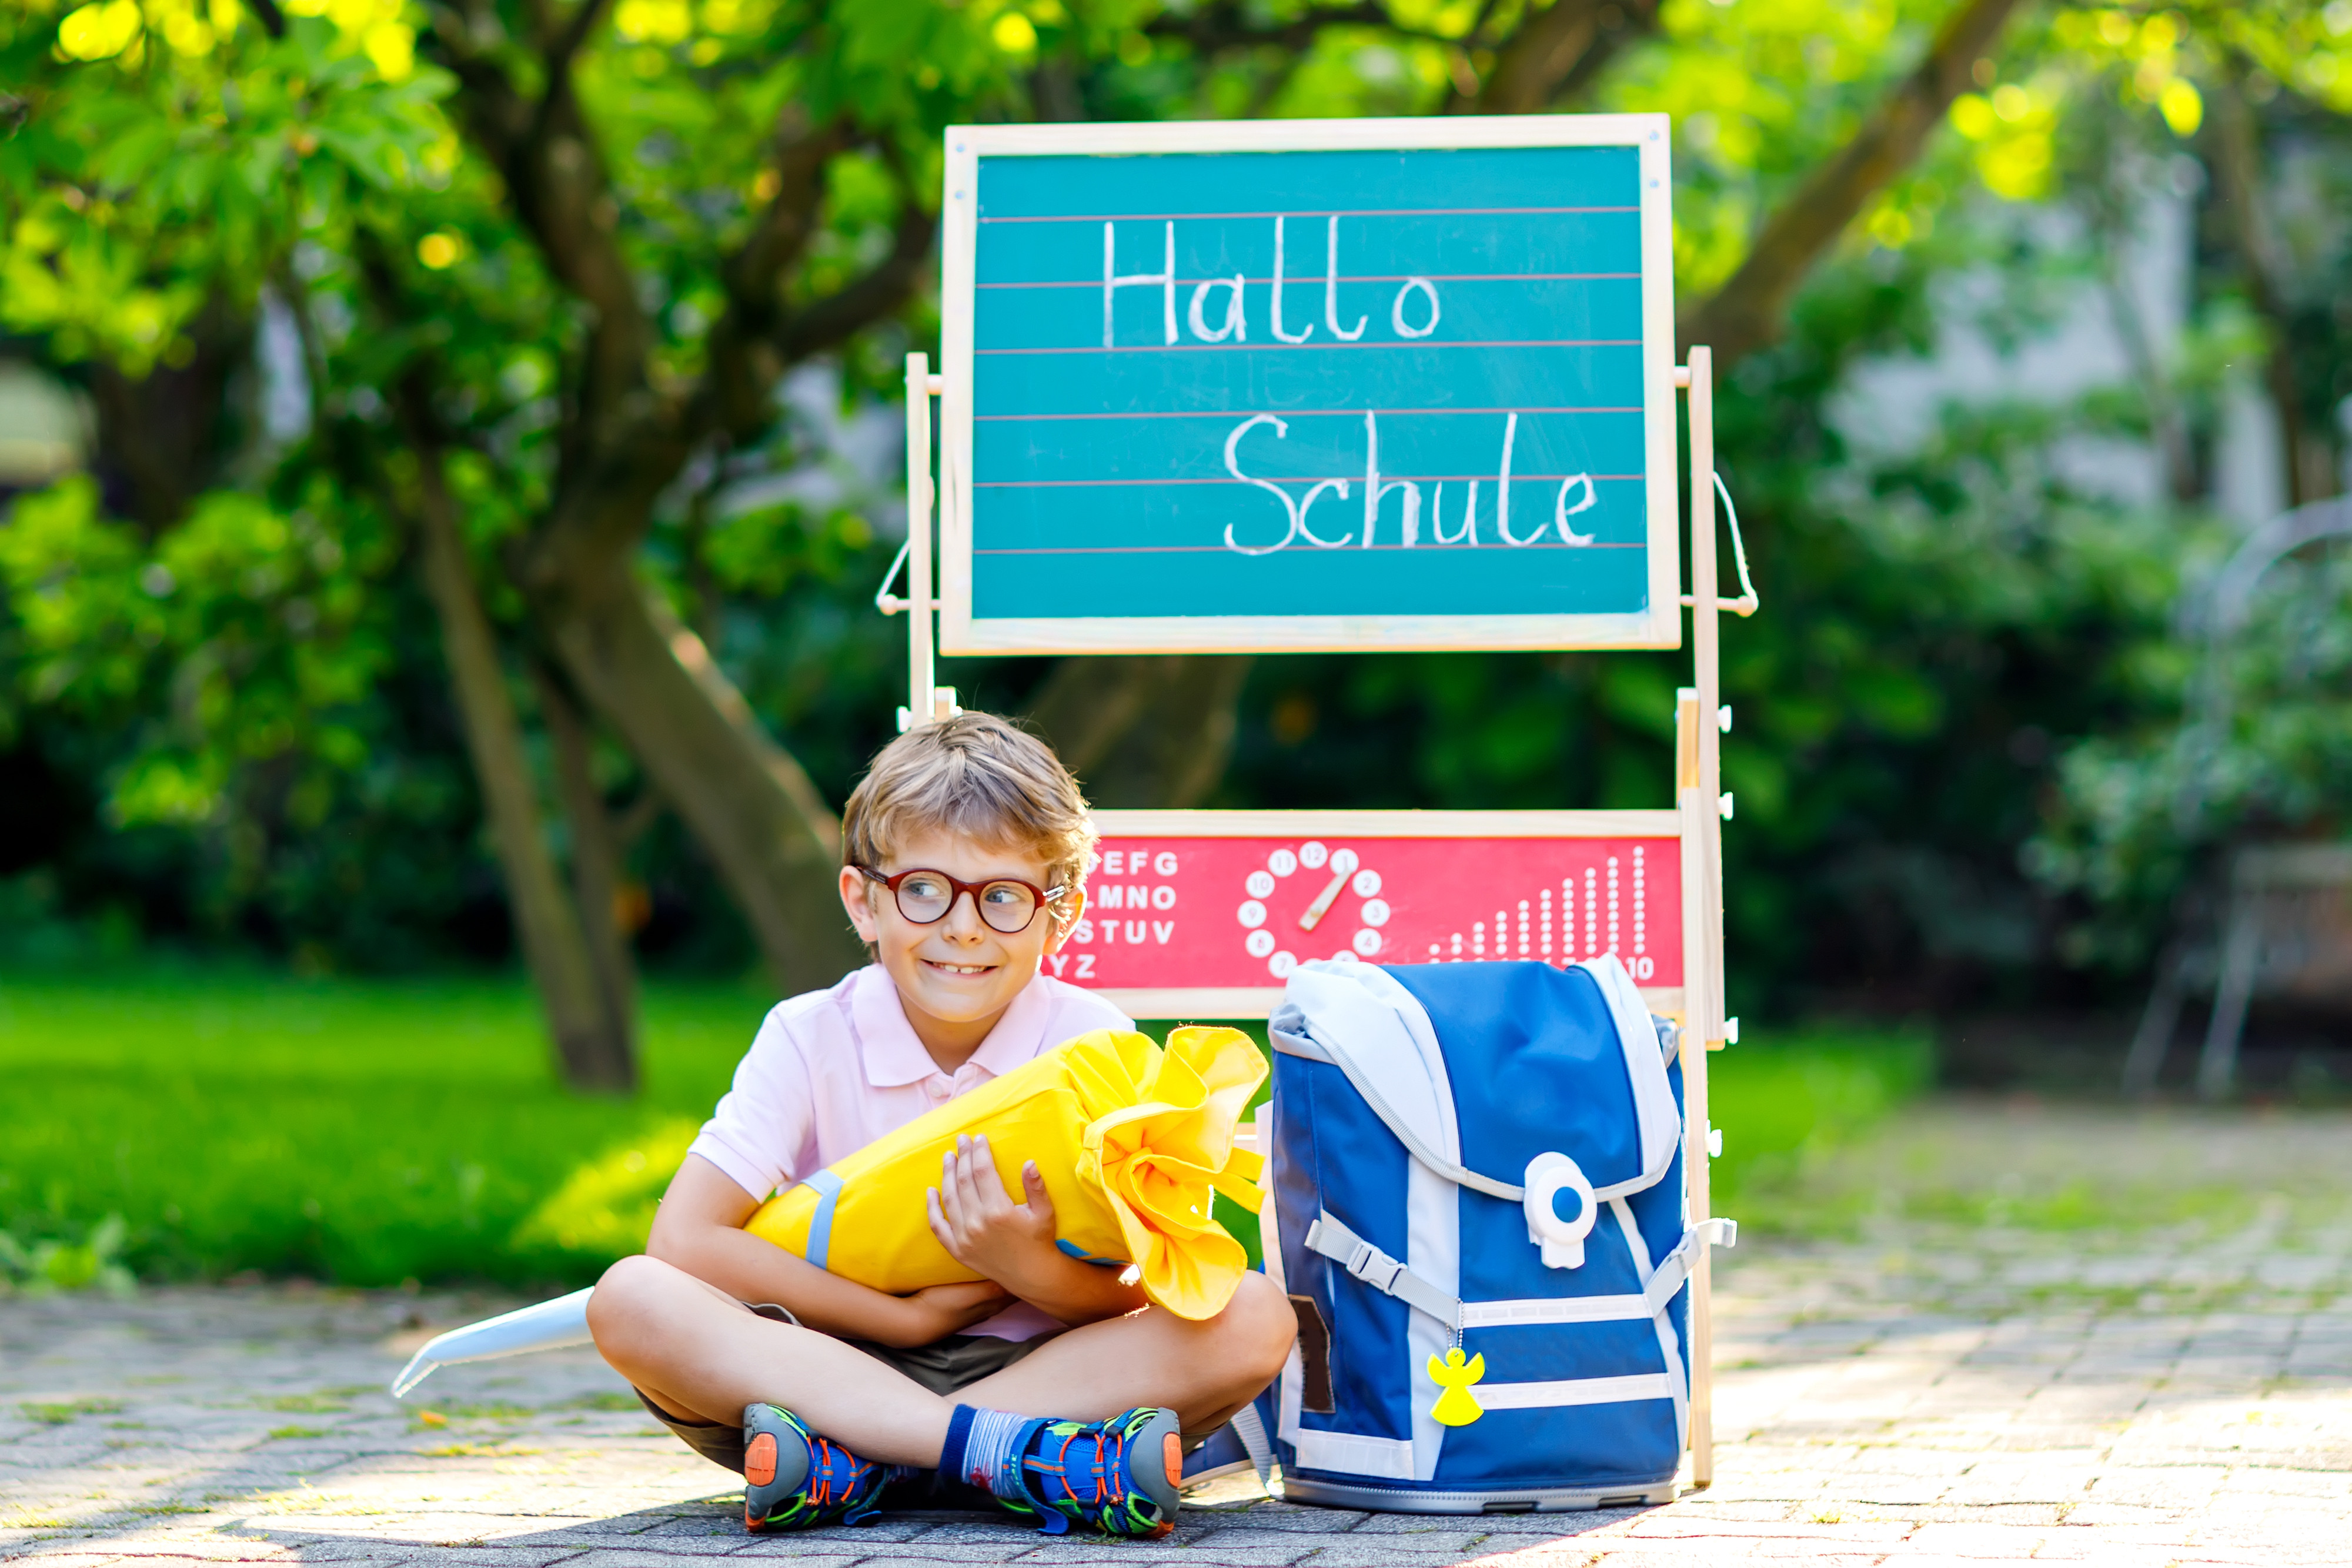 On the first day of Grade One, German pupils receive a cone filled with gifts from their parents. Photo: Shutterstock